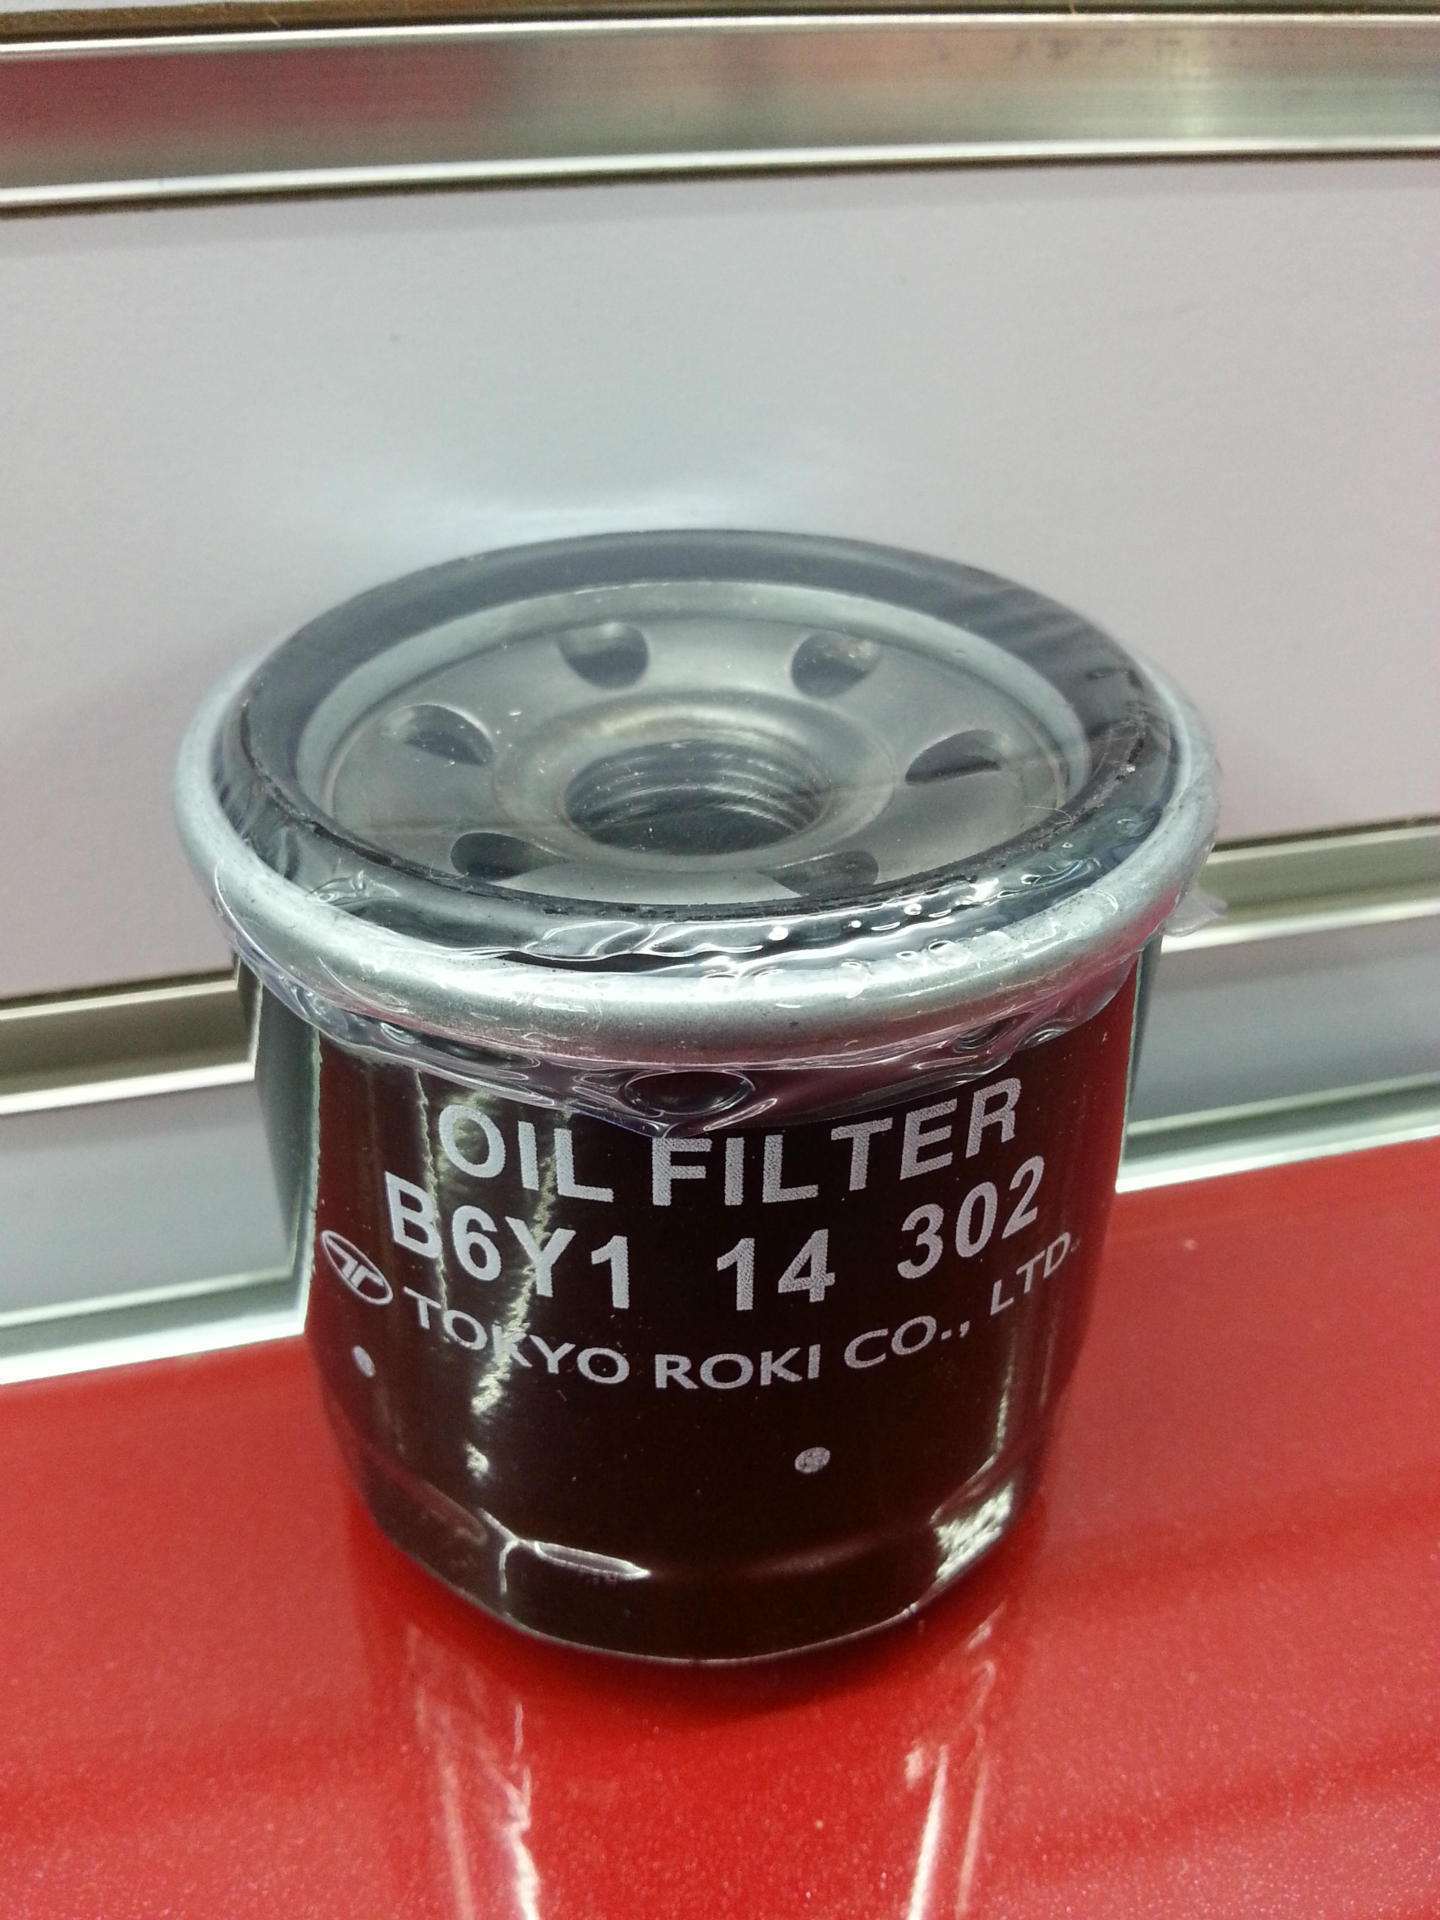 High Quality Oil Filter for Toyota Mazda B6y1-14-302